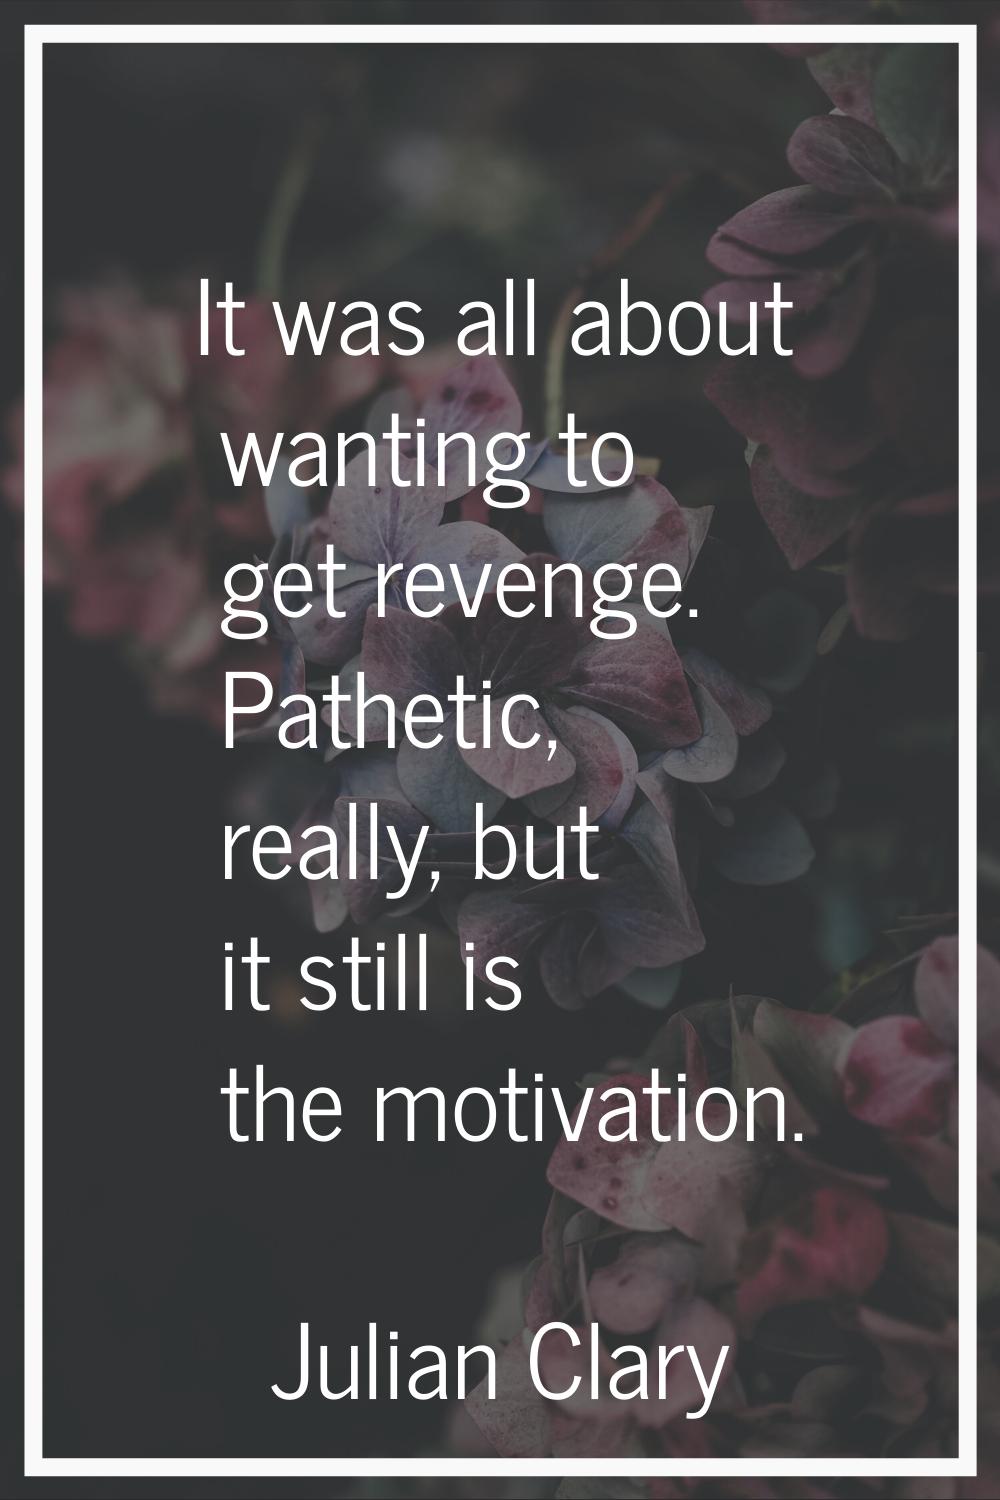 It was all about wanting to get revenge. Pathetic, really, but it still is the motivation.